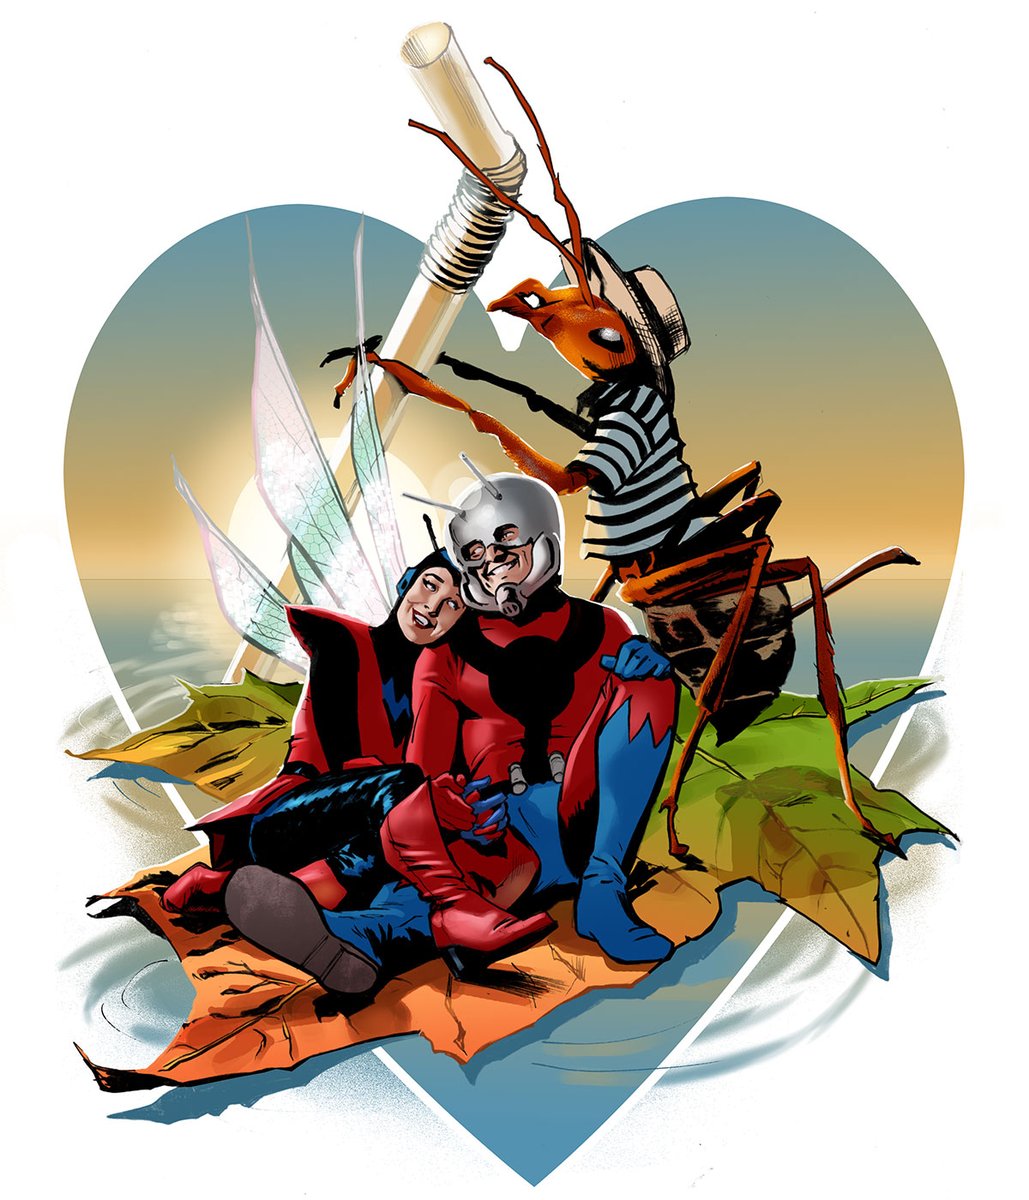 Happy Valentine's Day *and* ANT-MAN AND THE WASP: QUANTUMANIA week - here's the color version of the ridiculous piece I drew for #Jacktober a few years back.